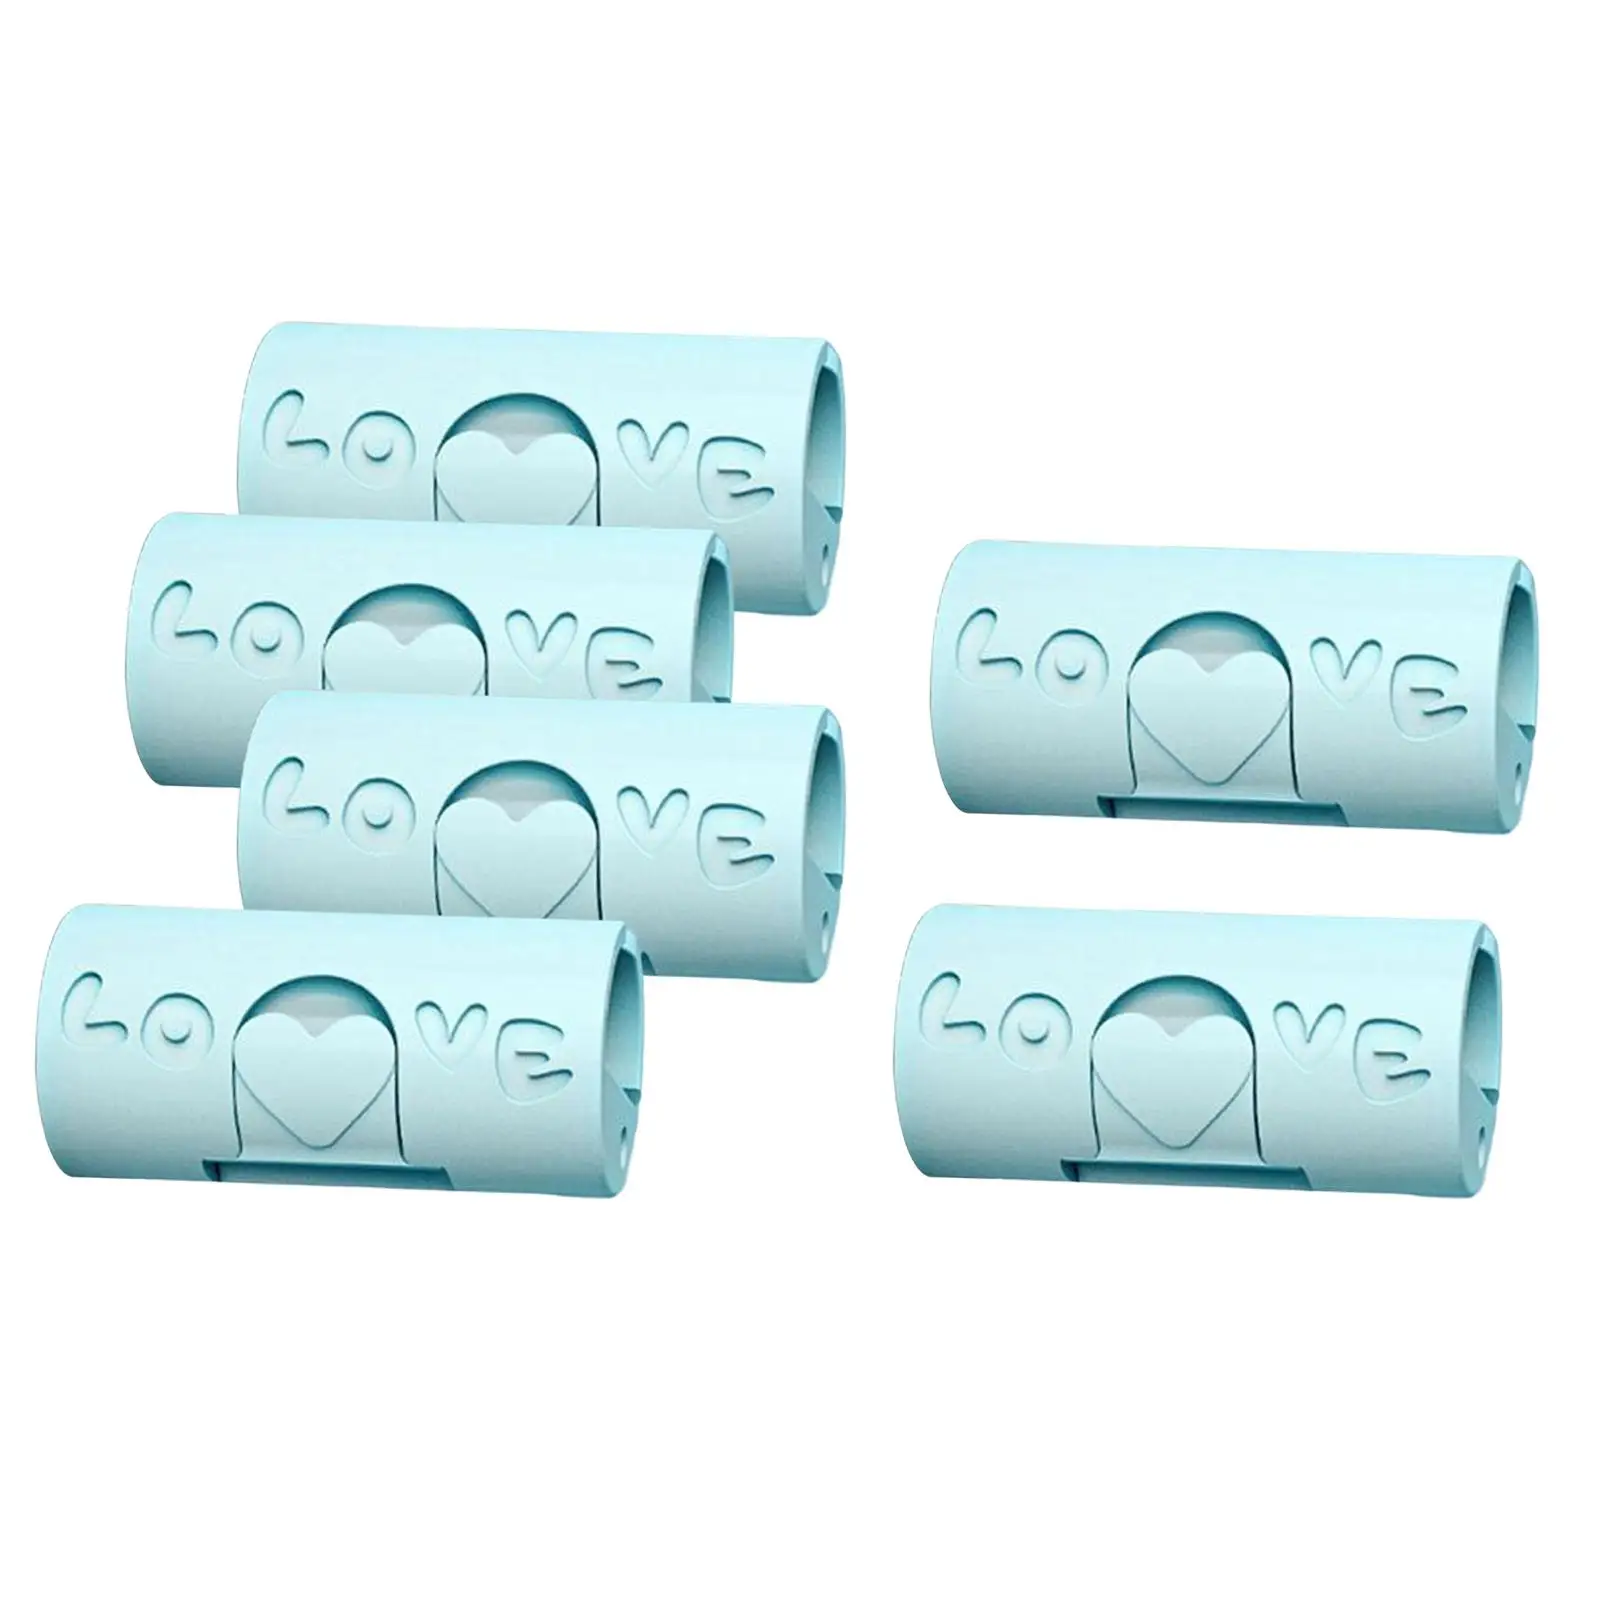 6Pcs Bed Sheet Clips Needleless Organizer Clamp for Fixing Comforter Towels Mattress Covers